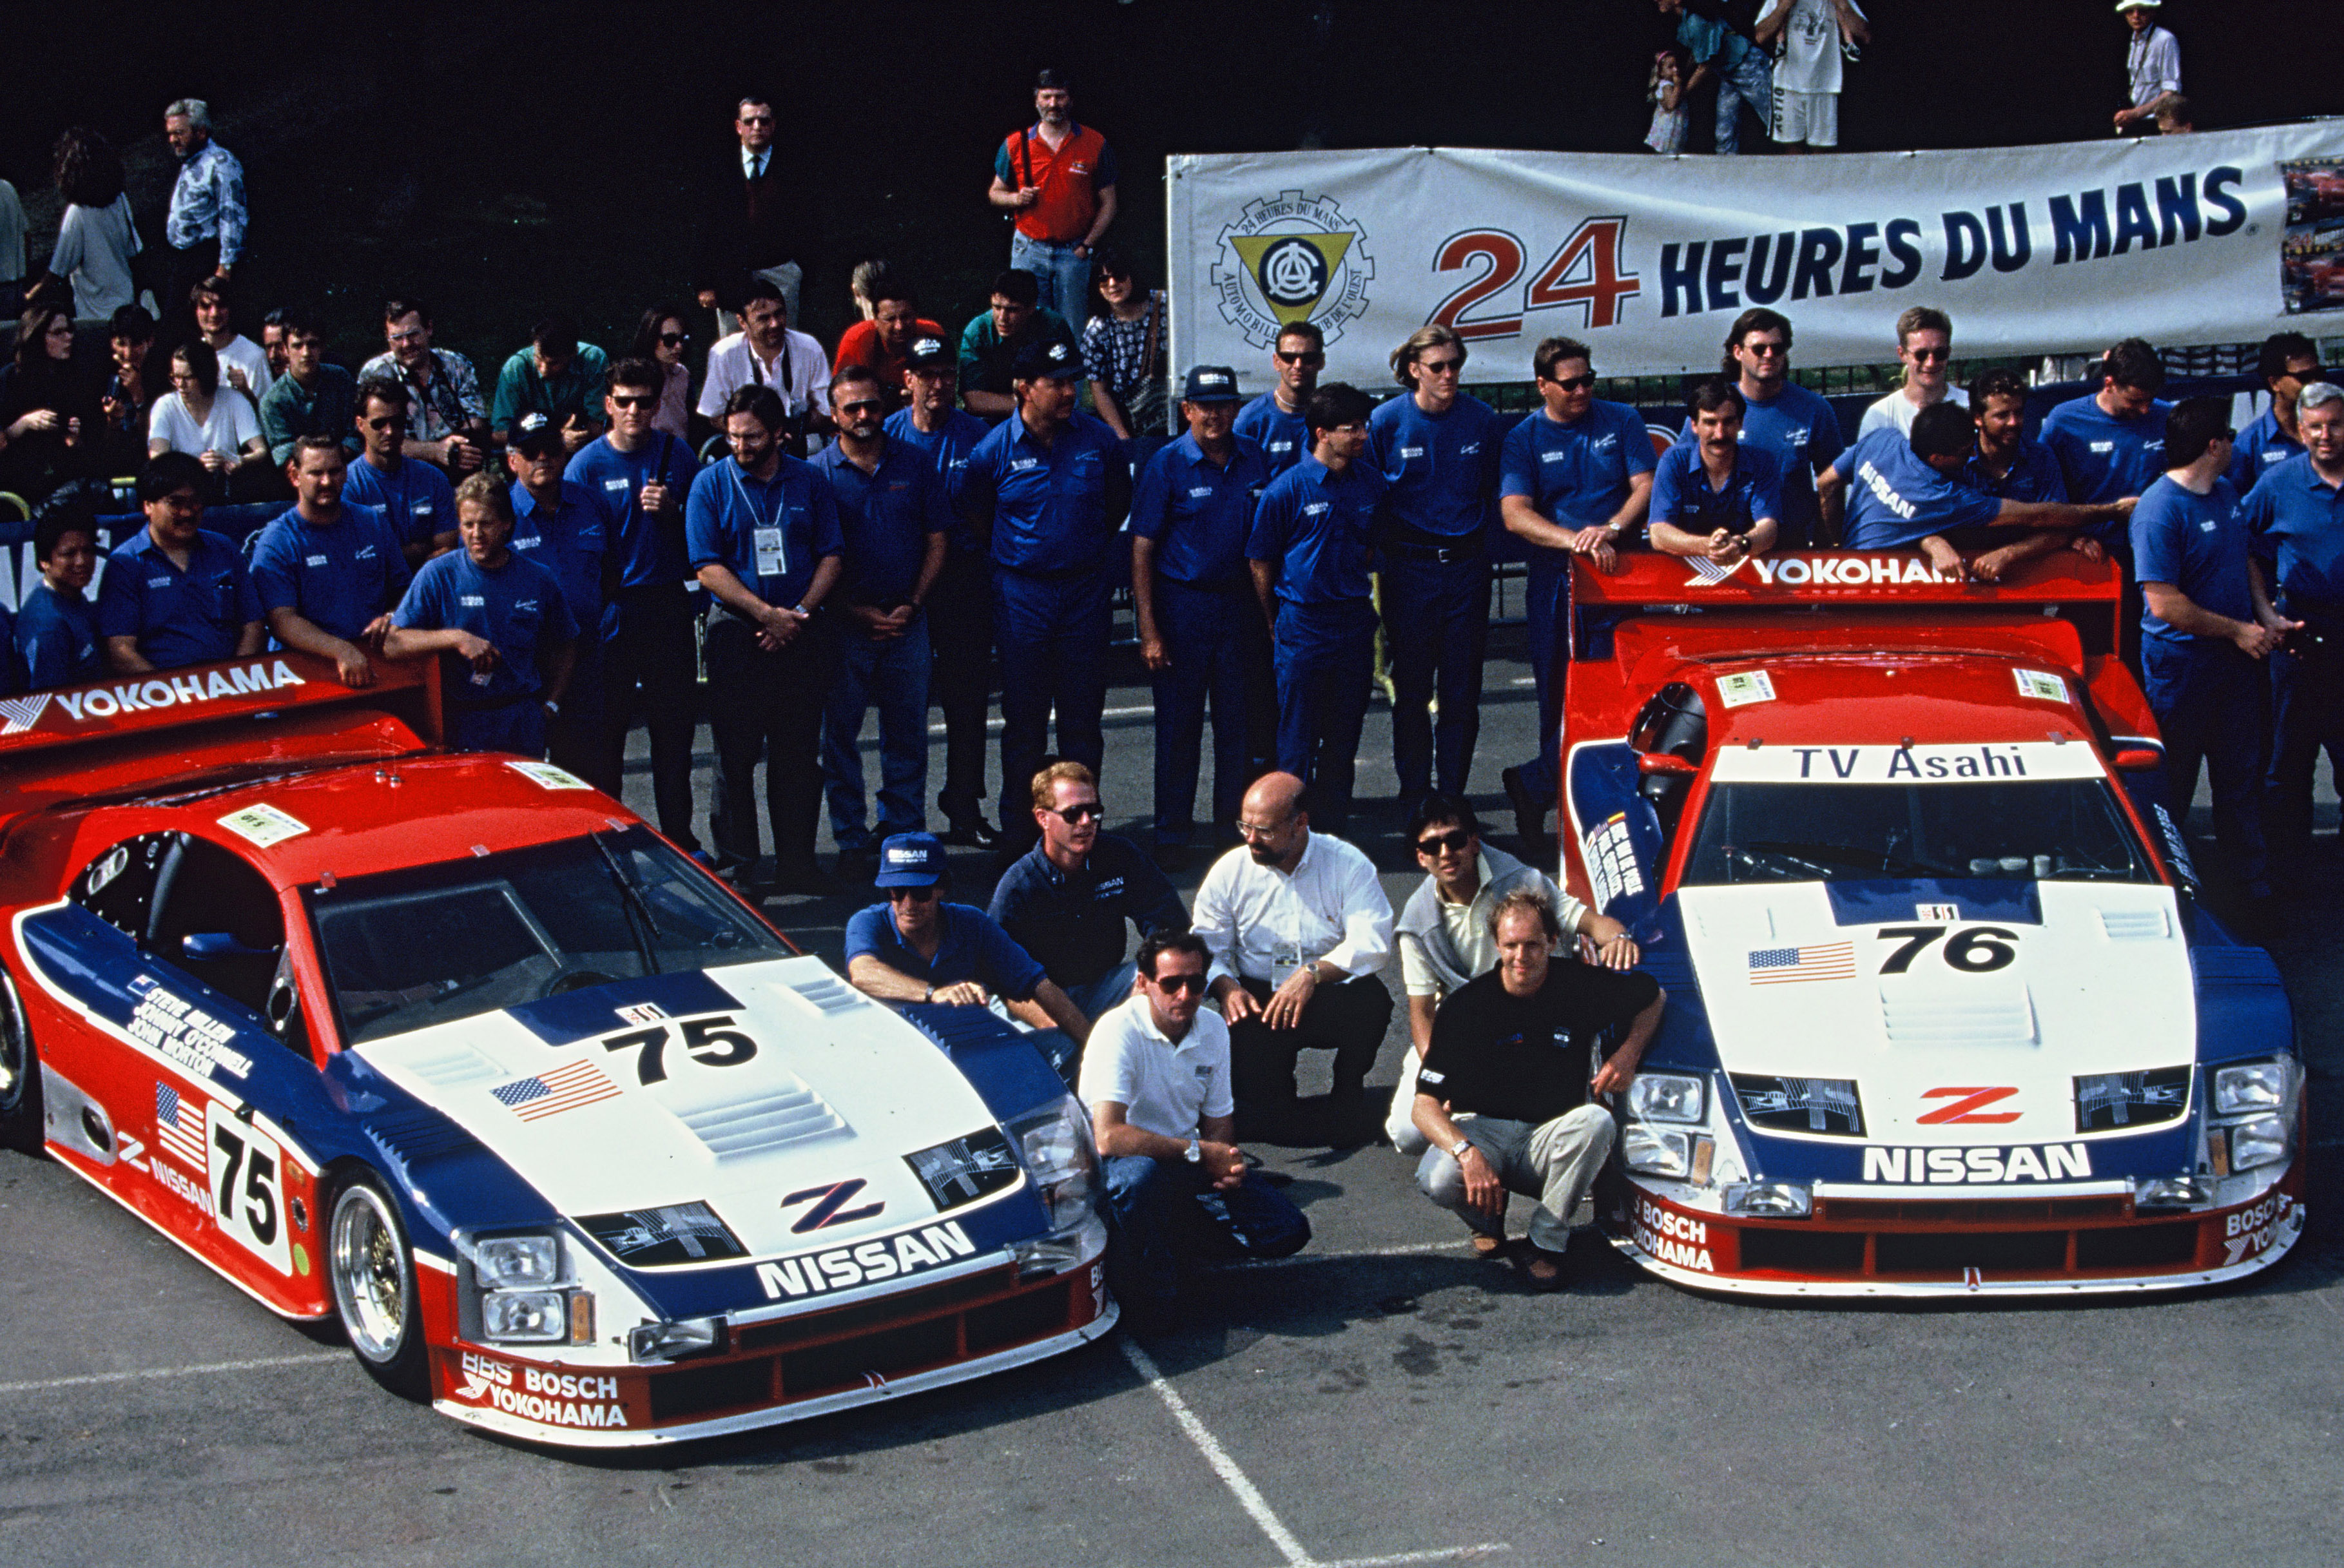 Steve Millen & team with the No. 75 Nissan 300ZX & No. 76 Nissan 300ZX After Winning the 1994 24 Hours of Le Mans